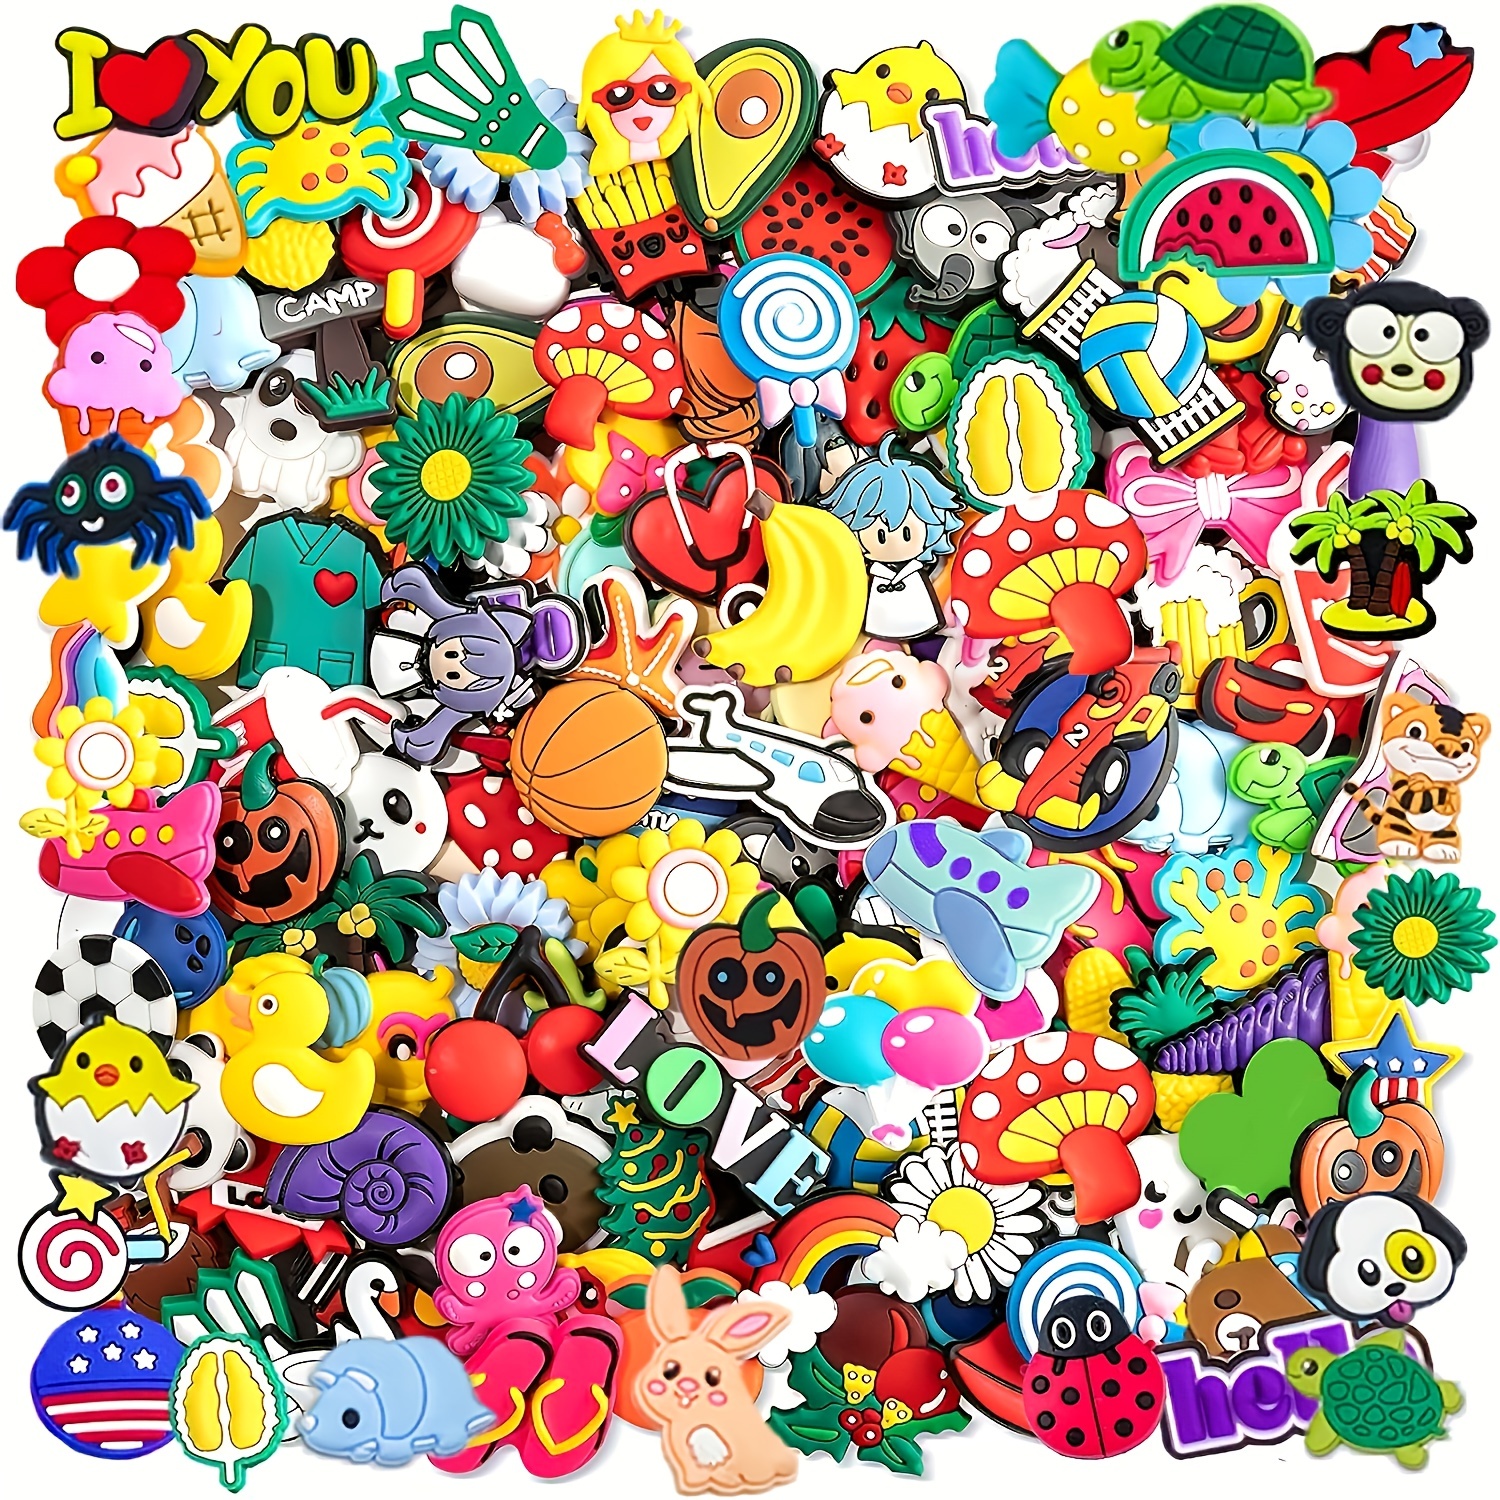  Taylor Music Sticker for Kids, 24pcs Make a Face Swift DIY  Stickers,Make Your Own Different Role Stickers,Birthday Party Favor  Supplies and Toys Gifts (Taylor Music) : Electronics